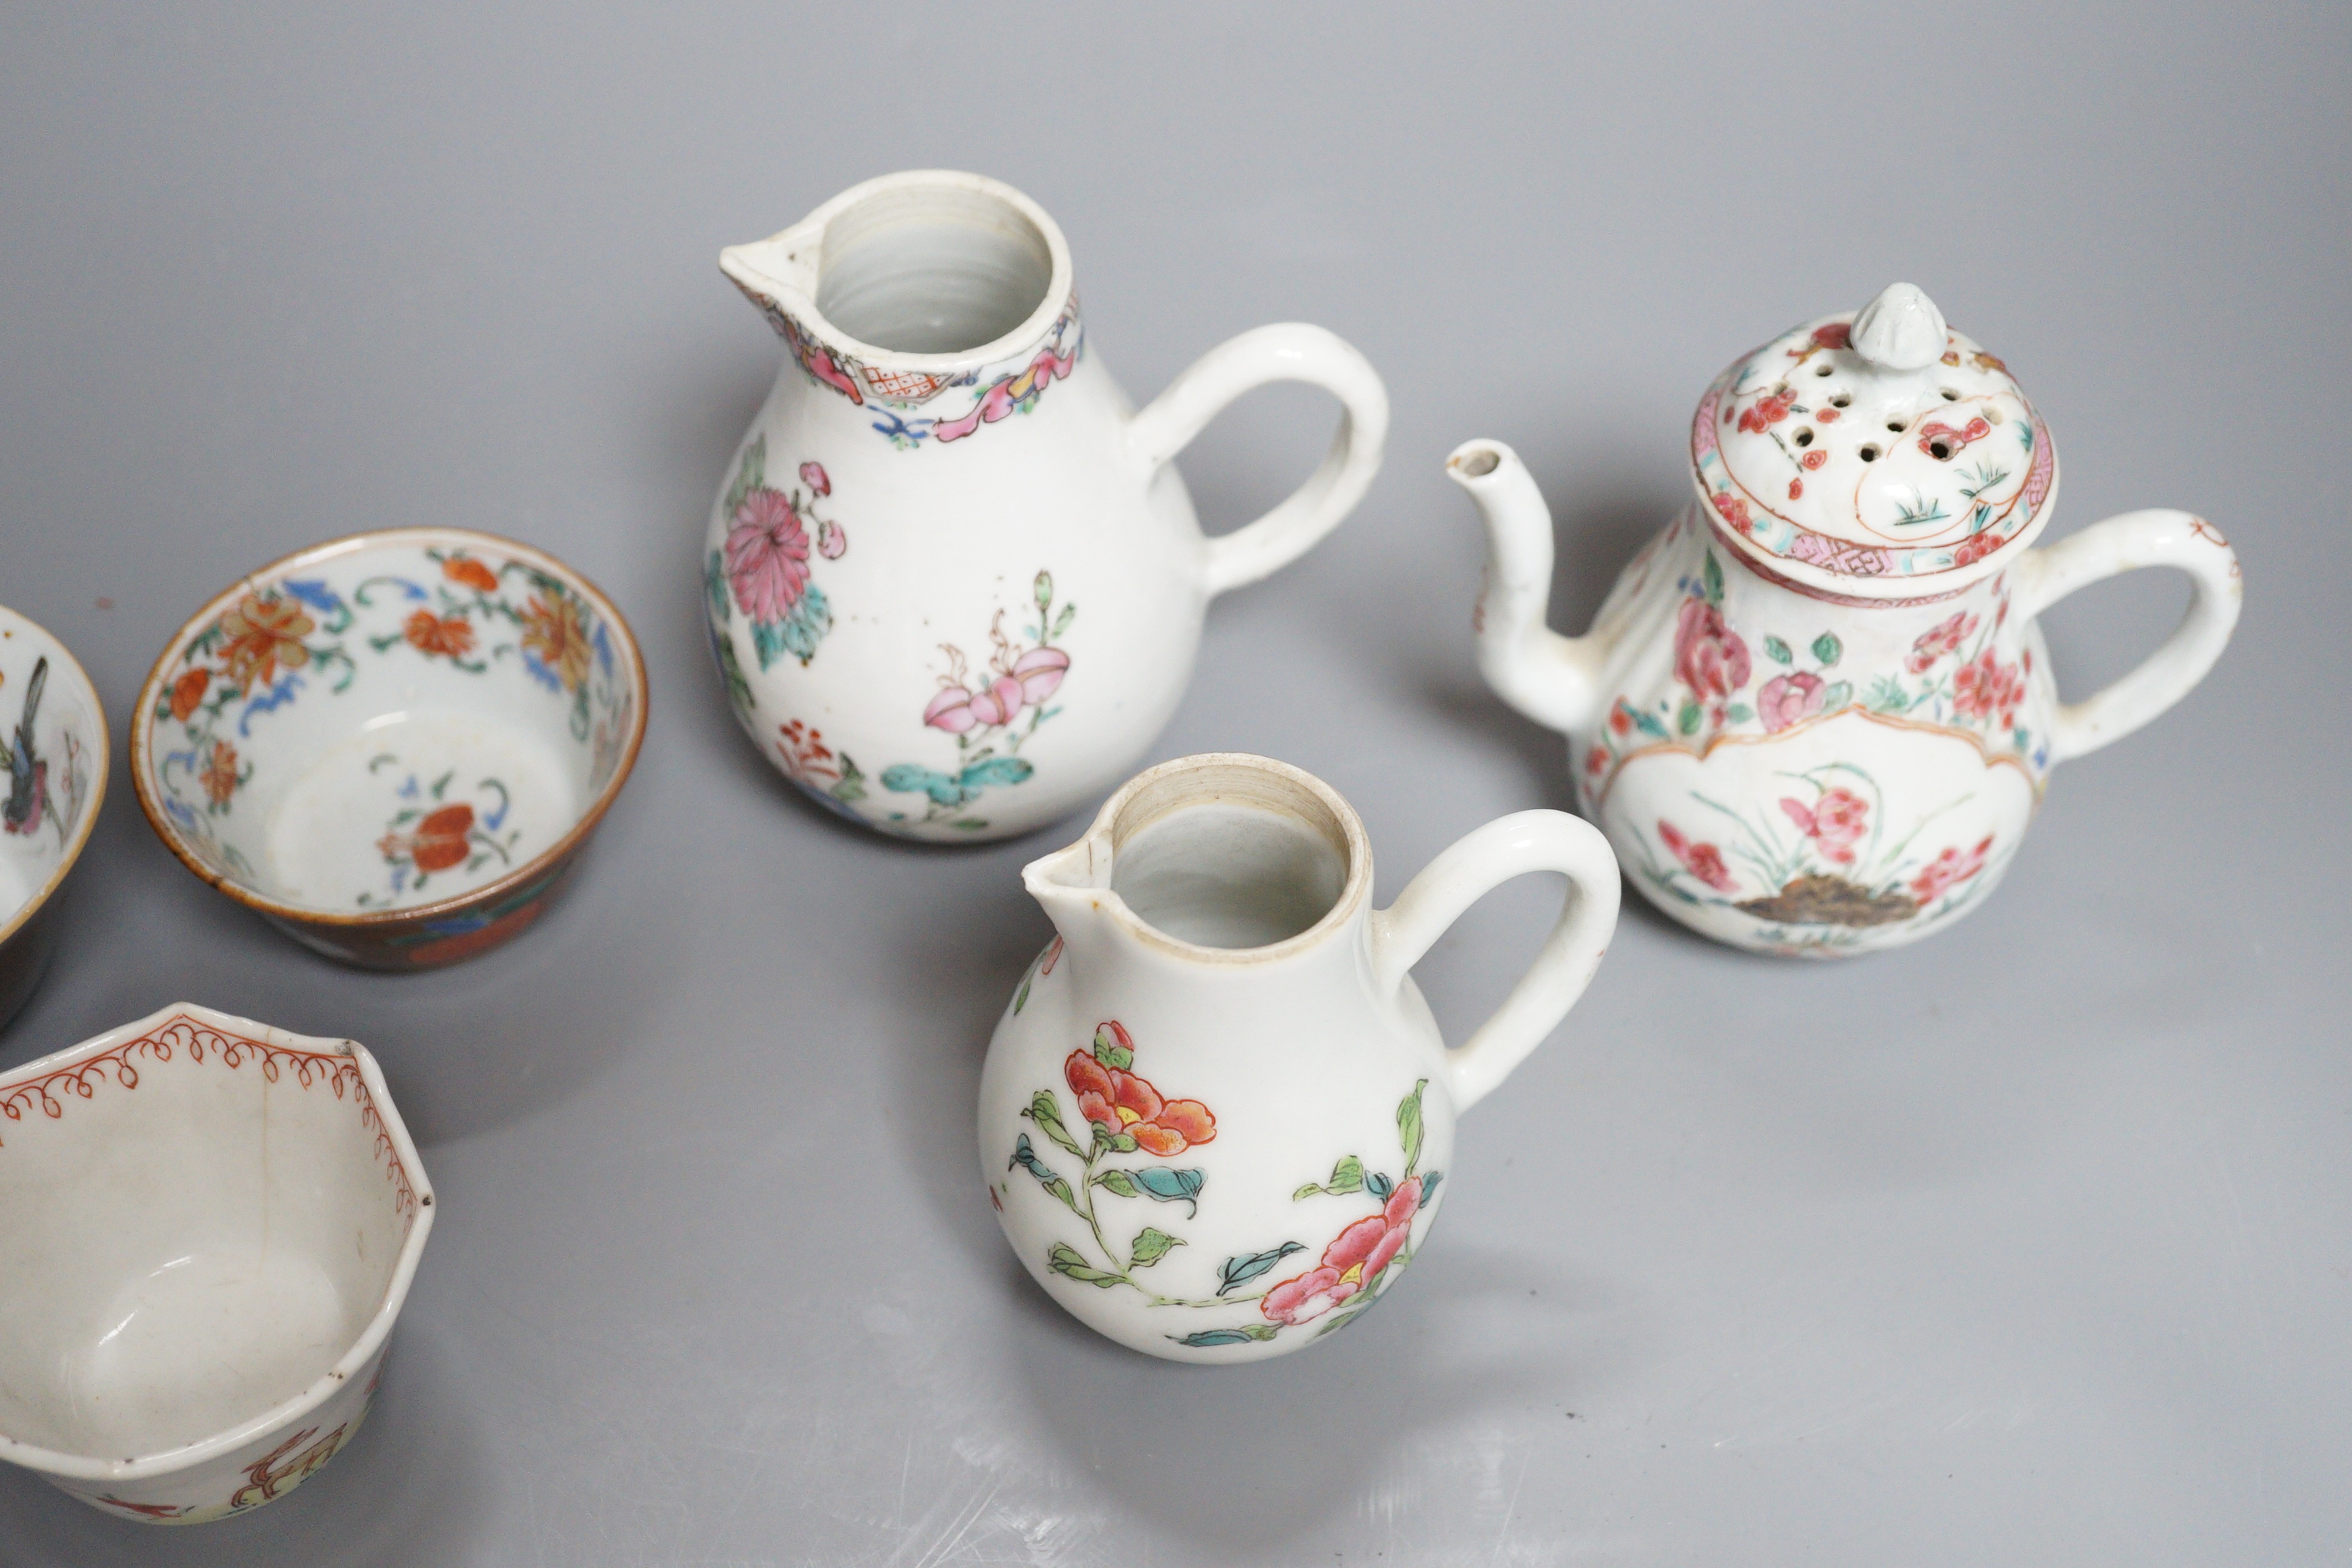 Three Chinese export famille rose cream jugs, one with pierced cover and three small bowls, 18th century and later